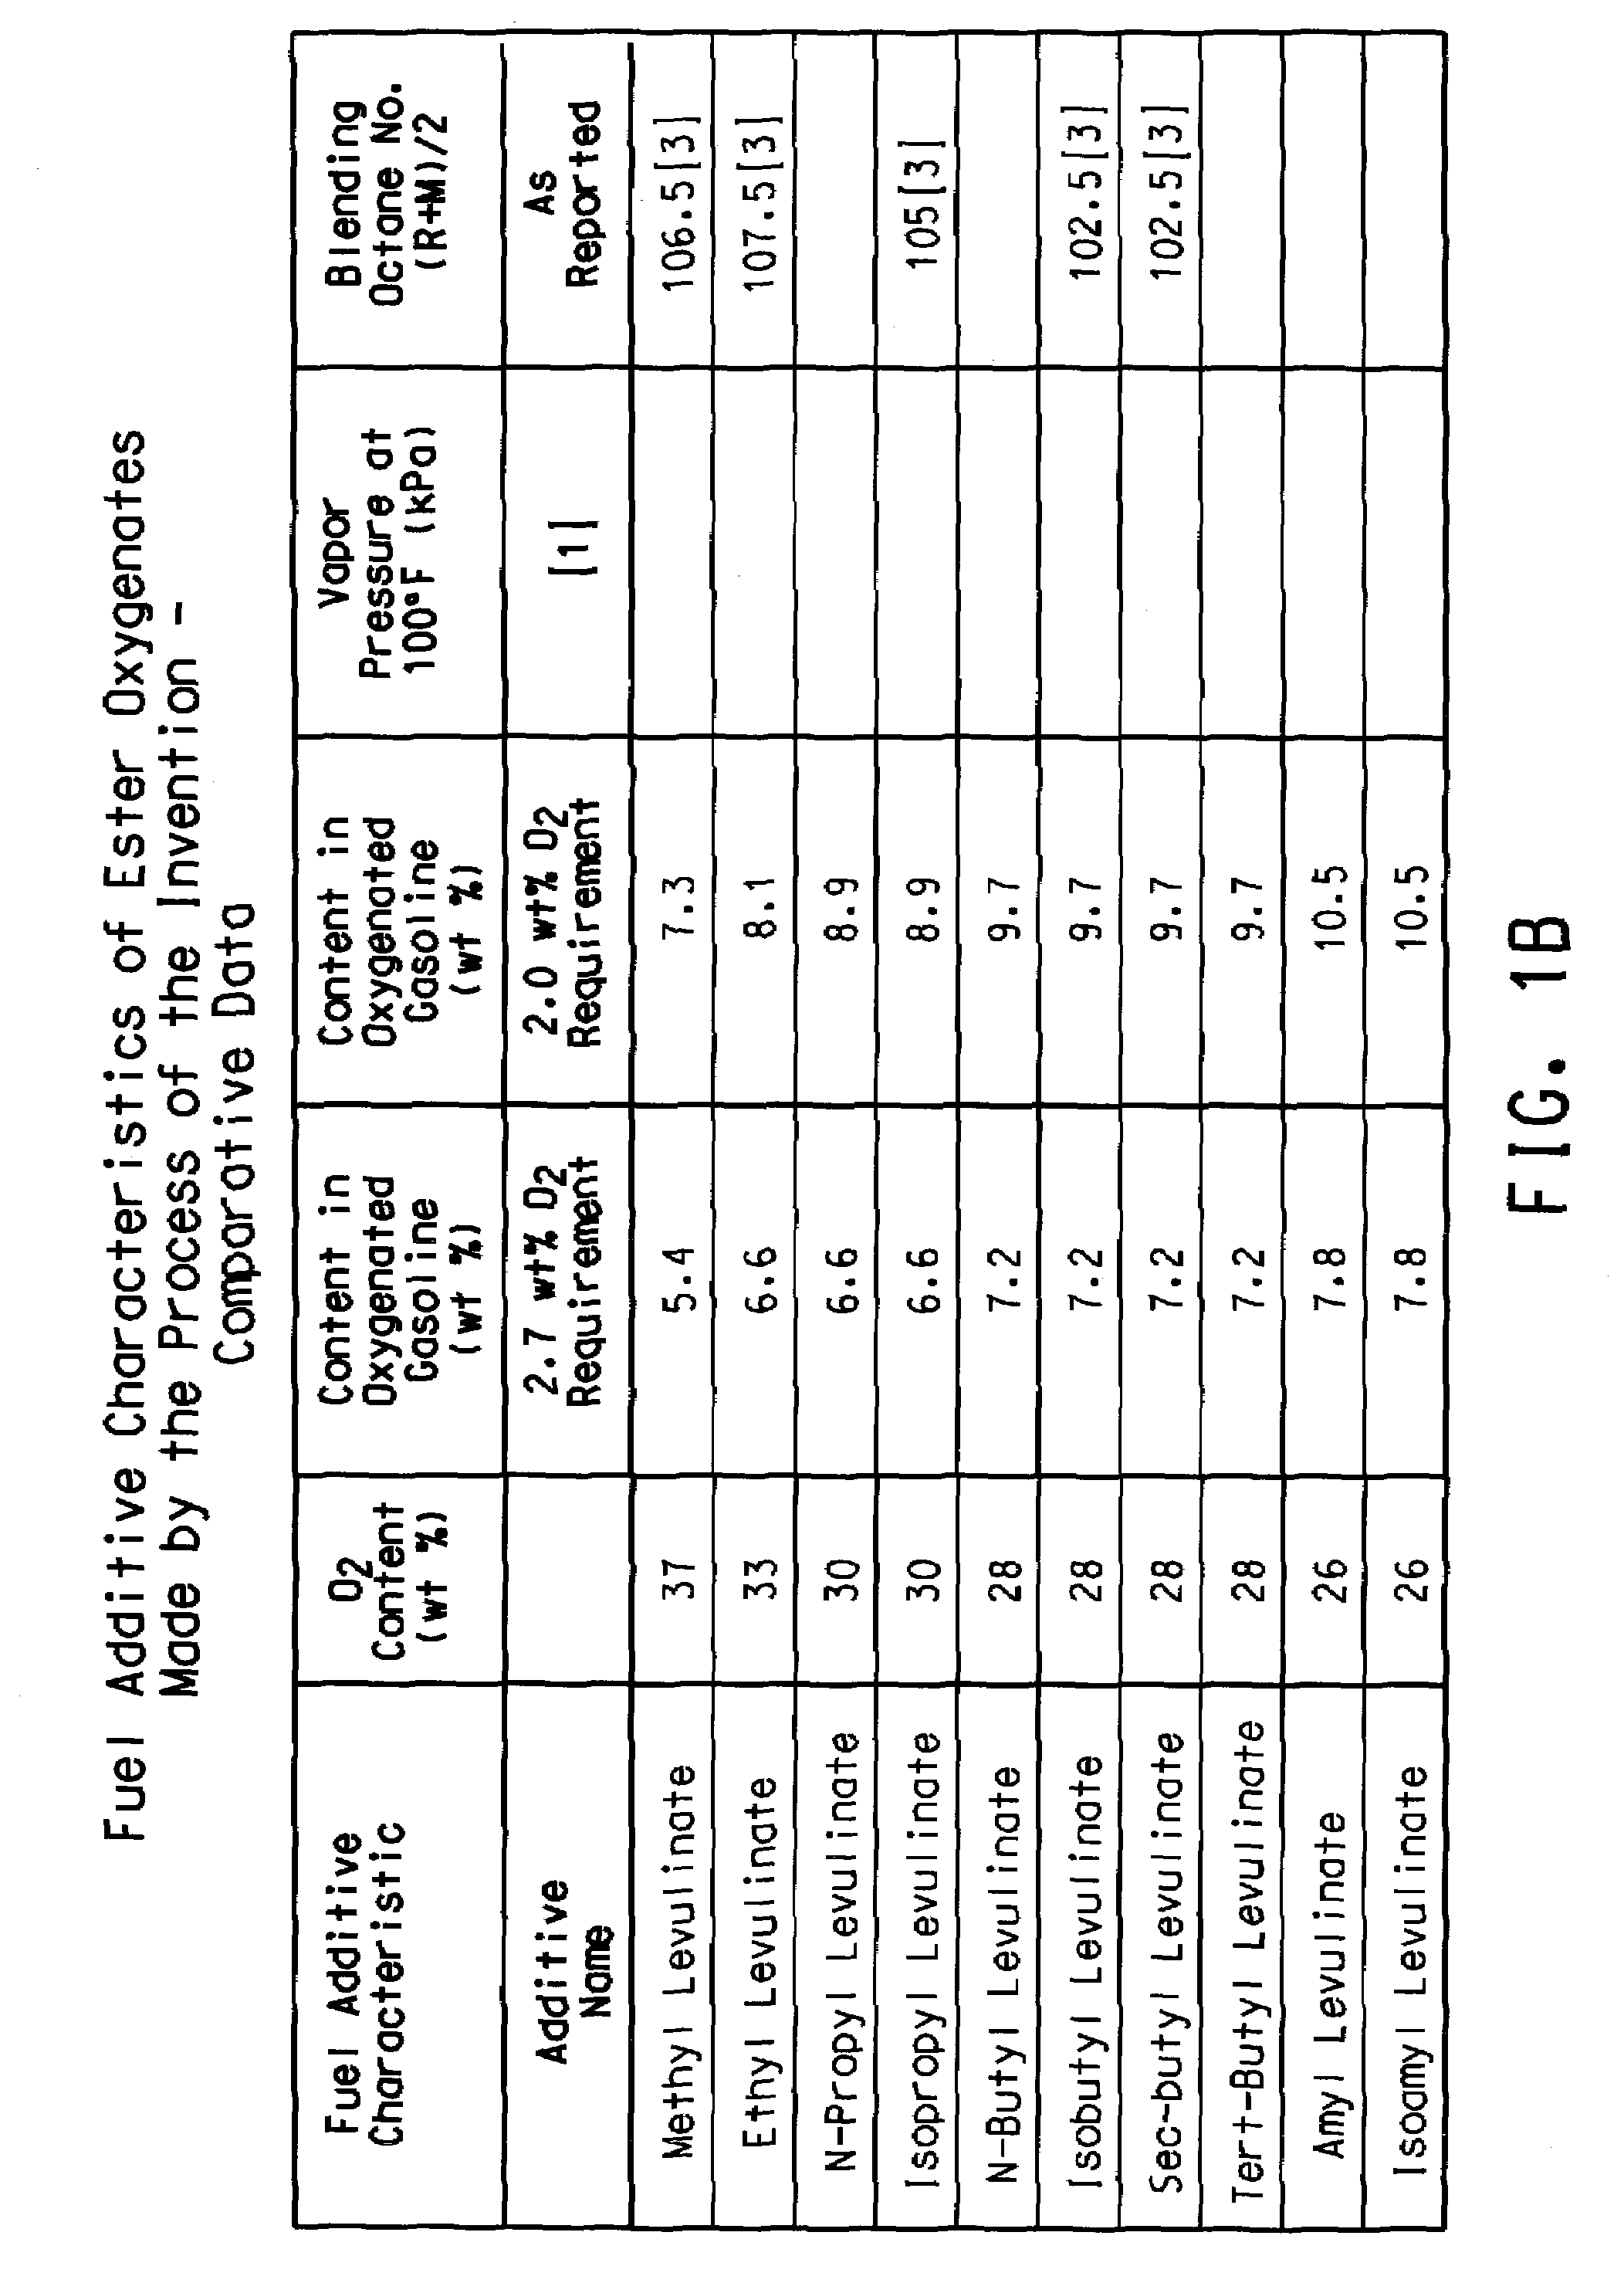 Preparation of levulinic acid esters and formic acid esters from biomass and olefins